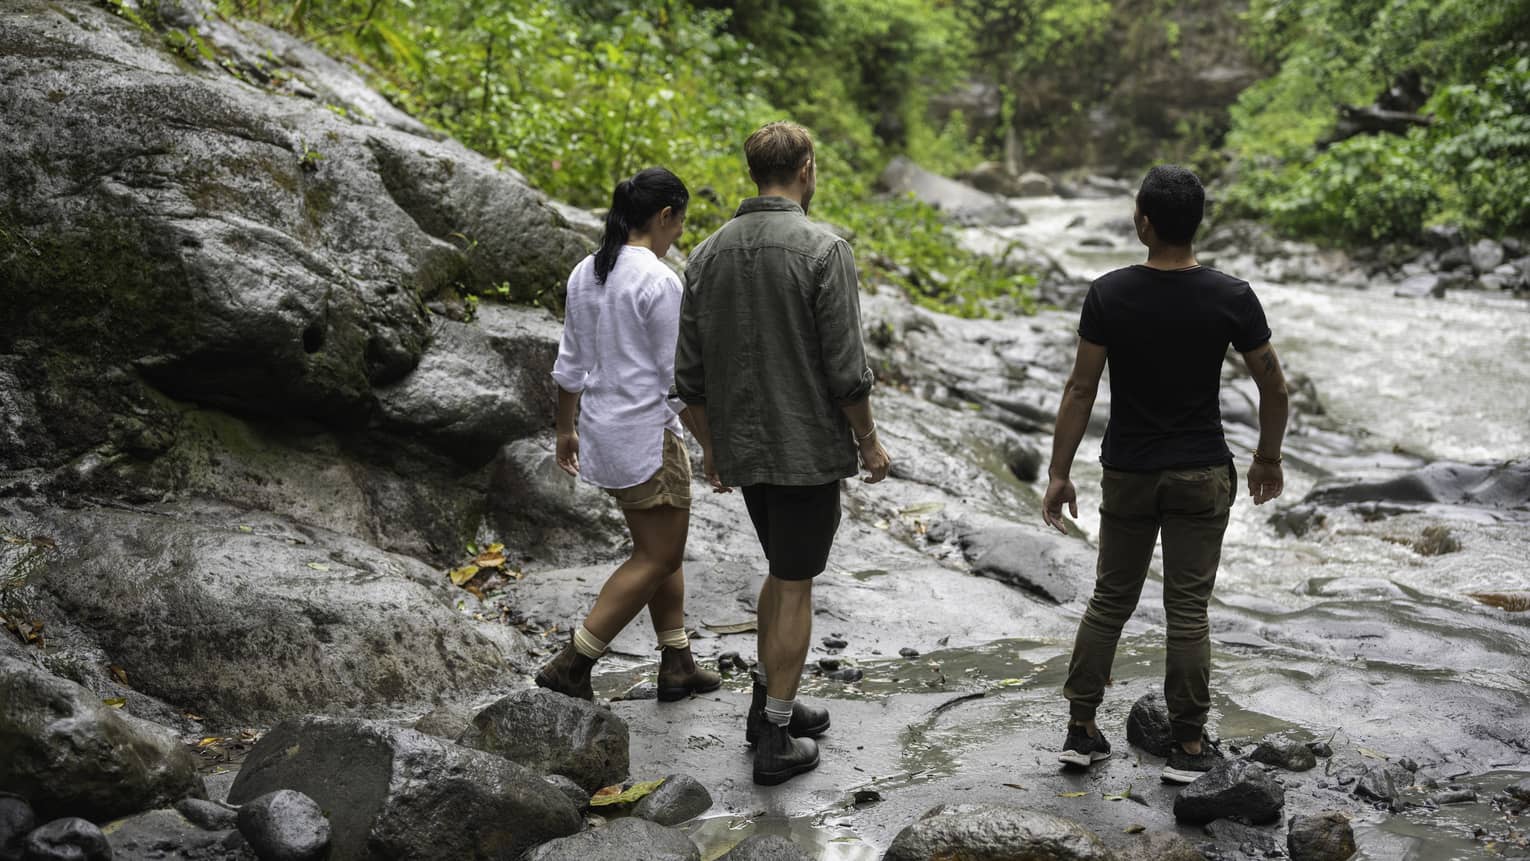 Three people walk along the rocks along the edge of a river